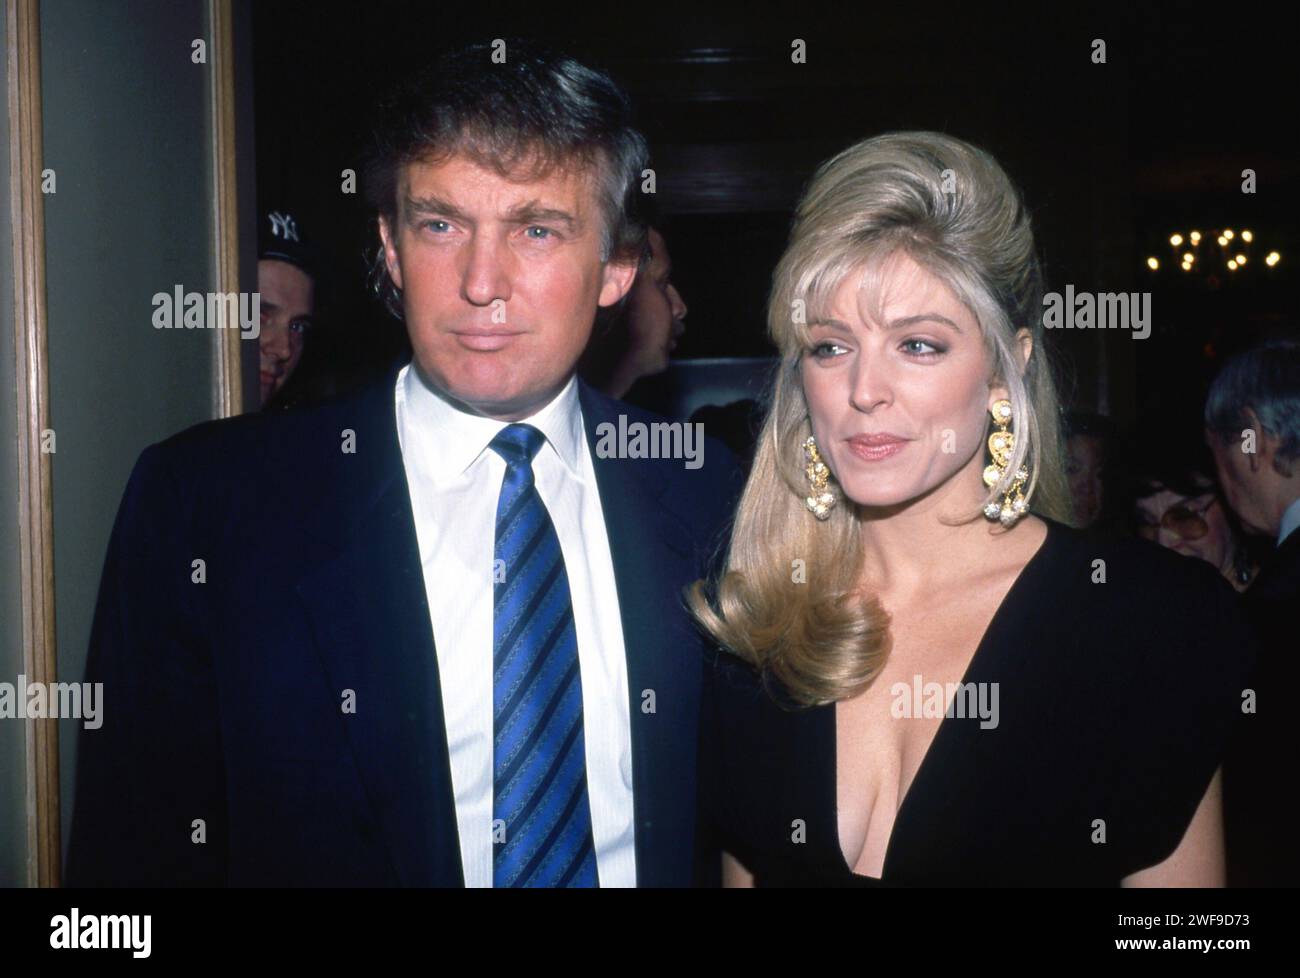 Donald Trump and Marla Maples attending a party for comedian Joey Adams, New York, January 1991.  Photo: Oscar Abolafia/Everett Collection  (donaldtrump003) Stock Photo